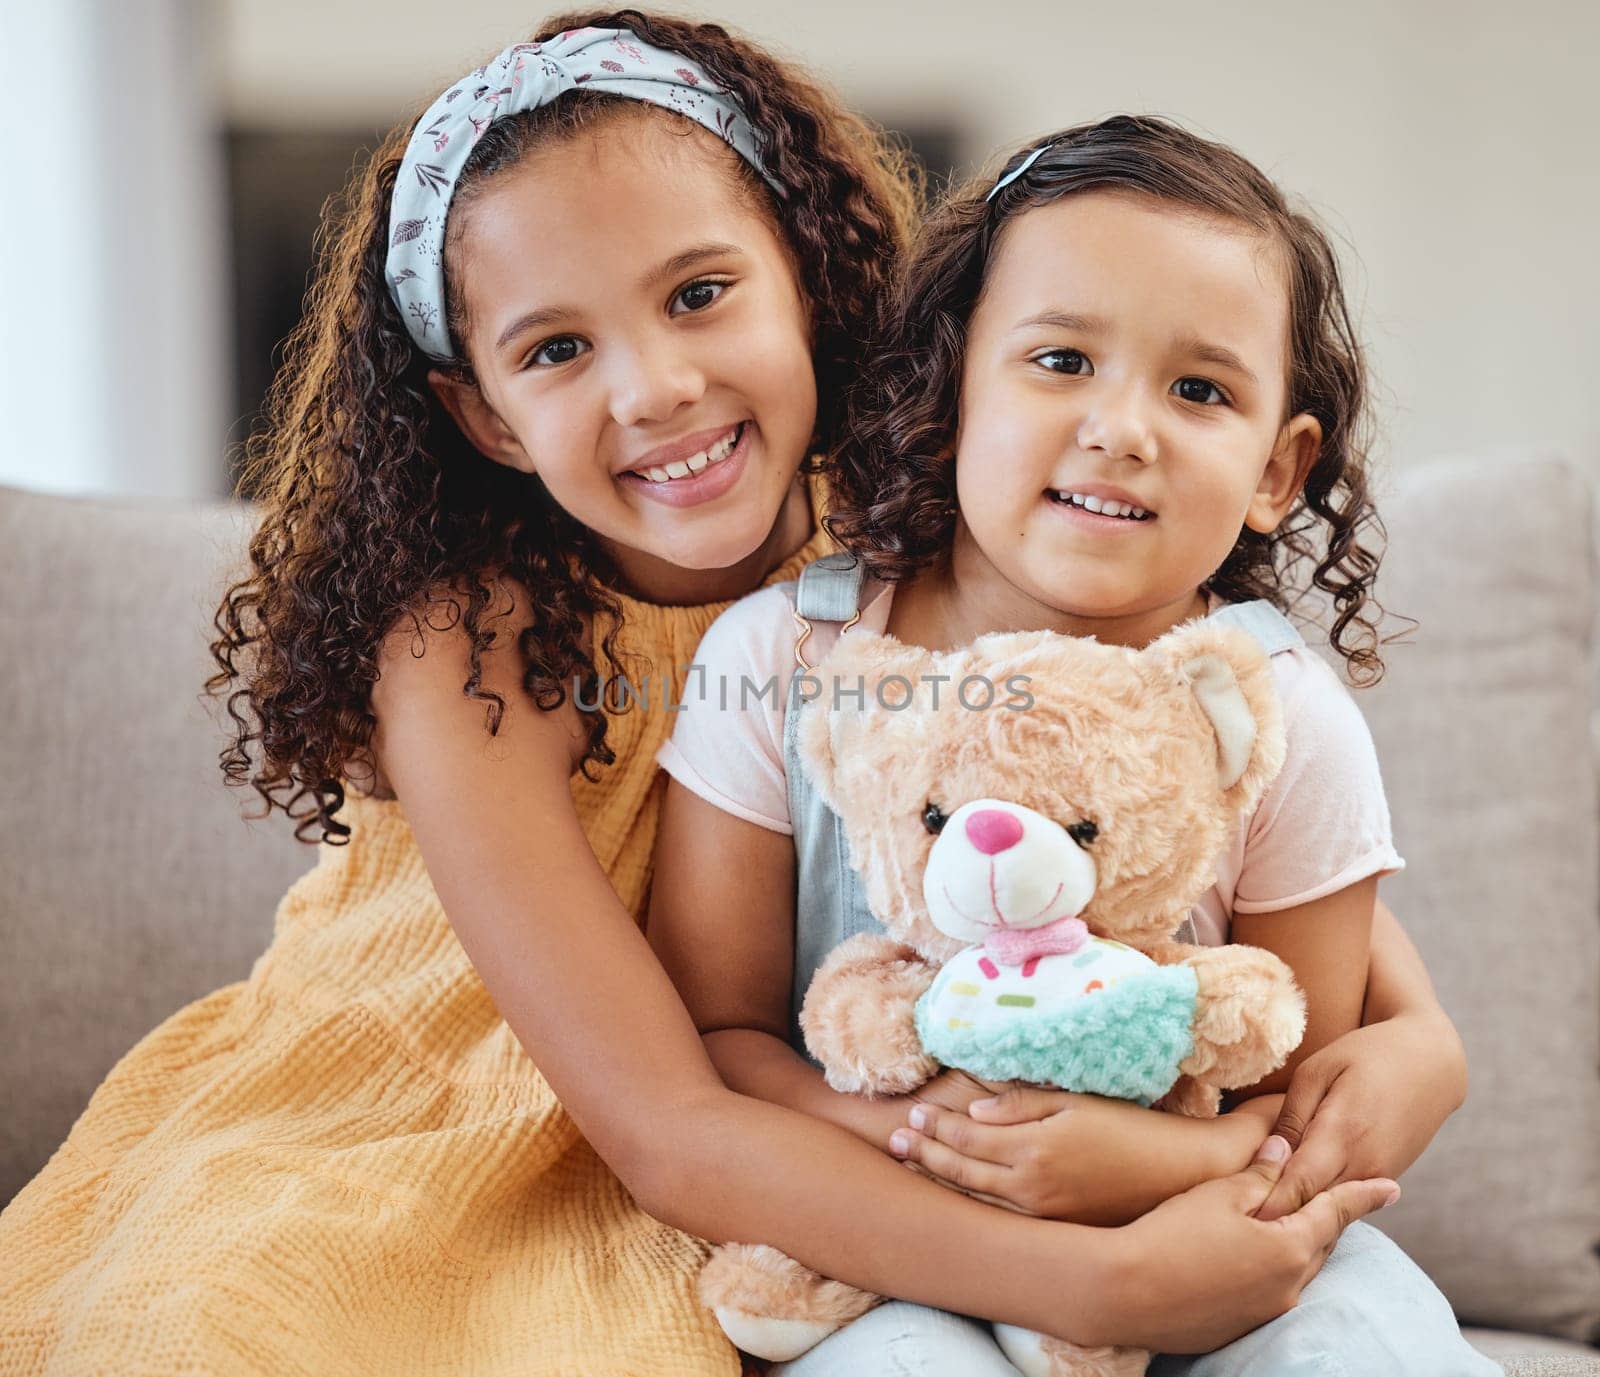 Family, children hug and portrait of girls on sofa in living room while holding teddy bear. Love, care and happy kids, sisters and siblings bonding, embrace and hugging on couch in lounge of house